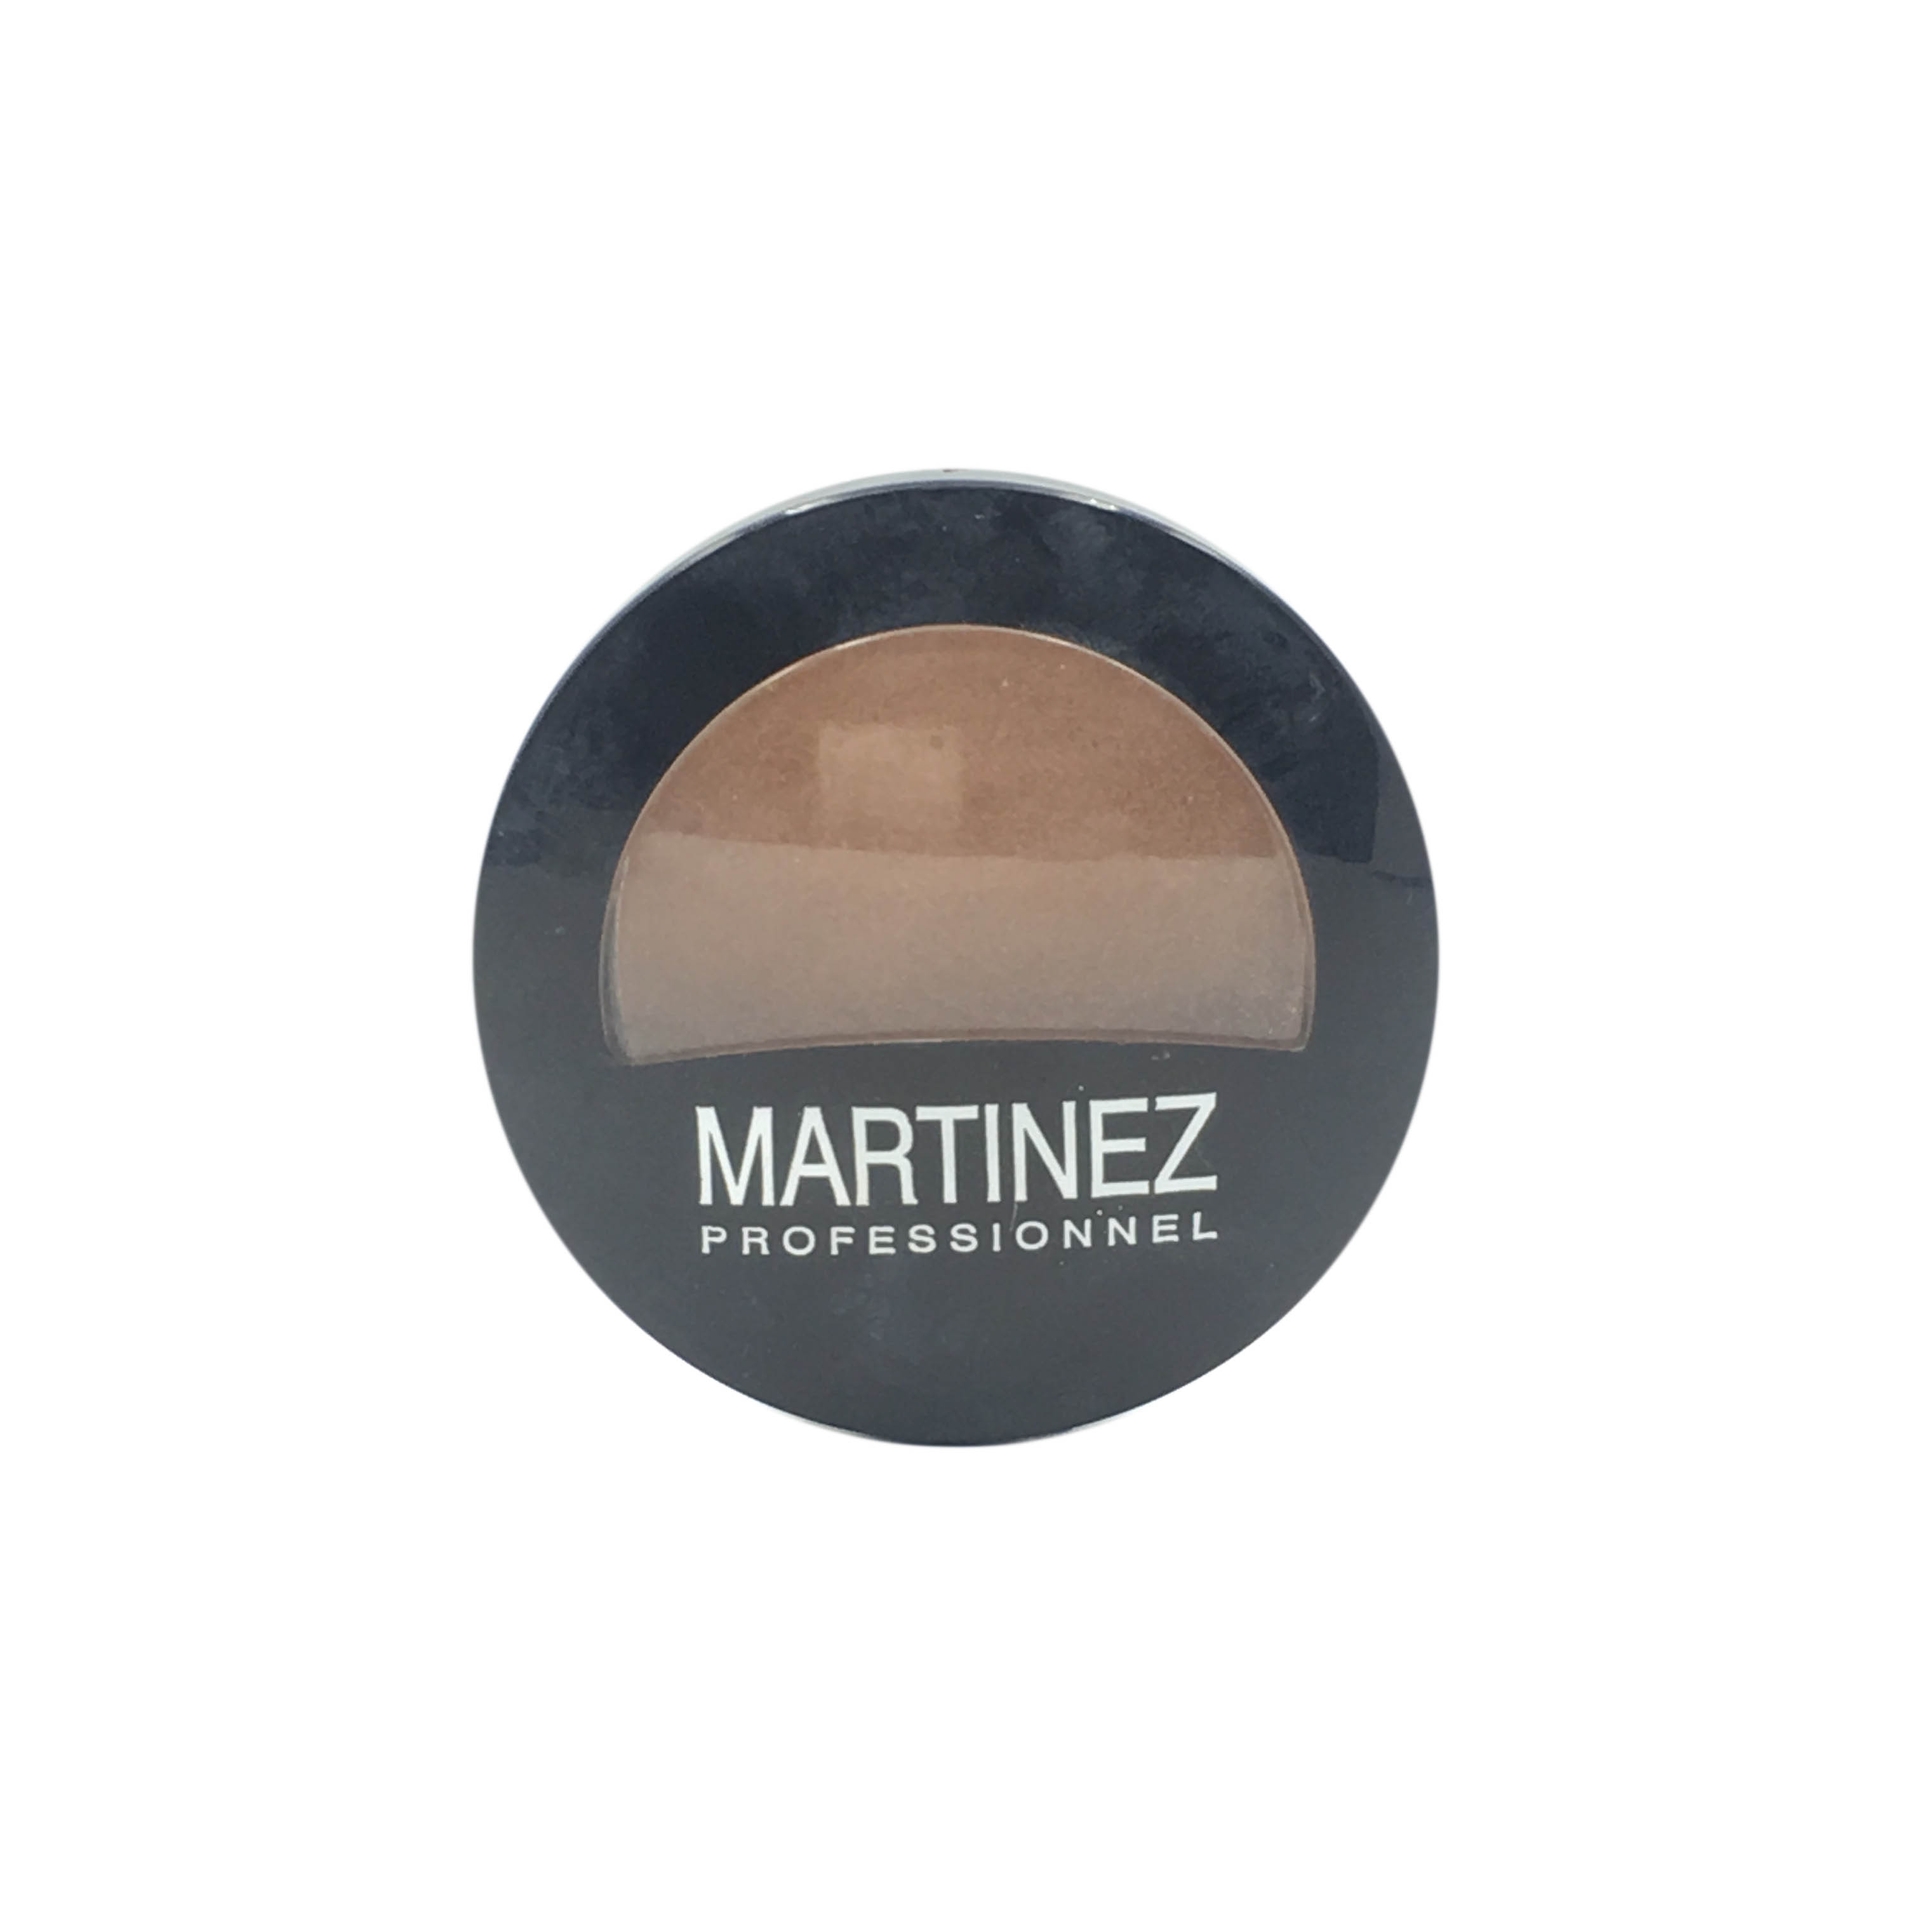 Private Collection Martinez Professionel Glam Blush On Shade 02 Bronze Reflection Faces